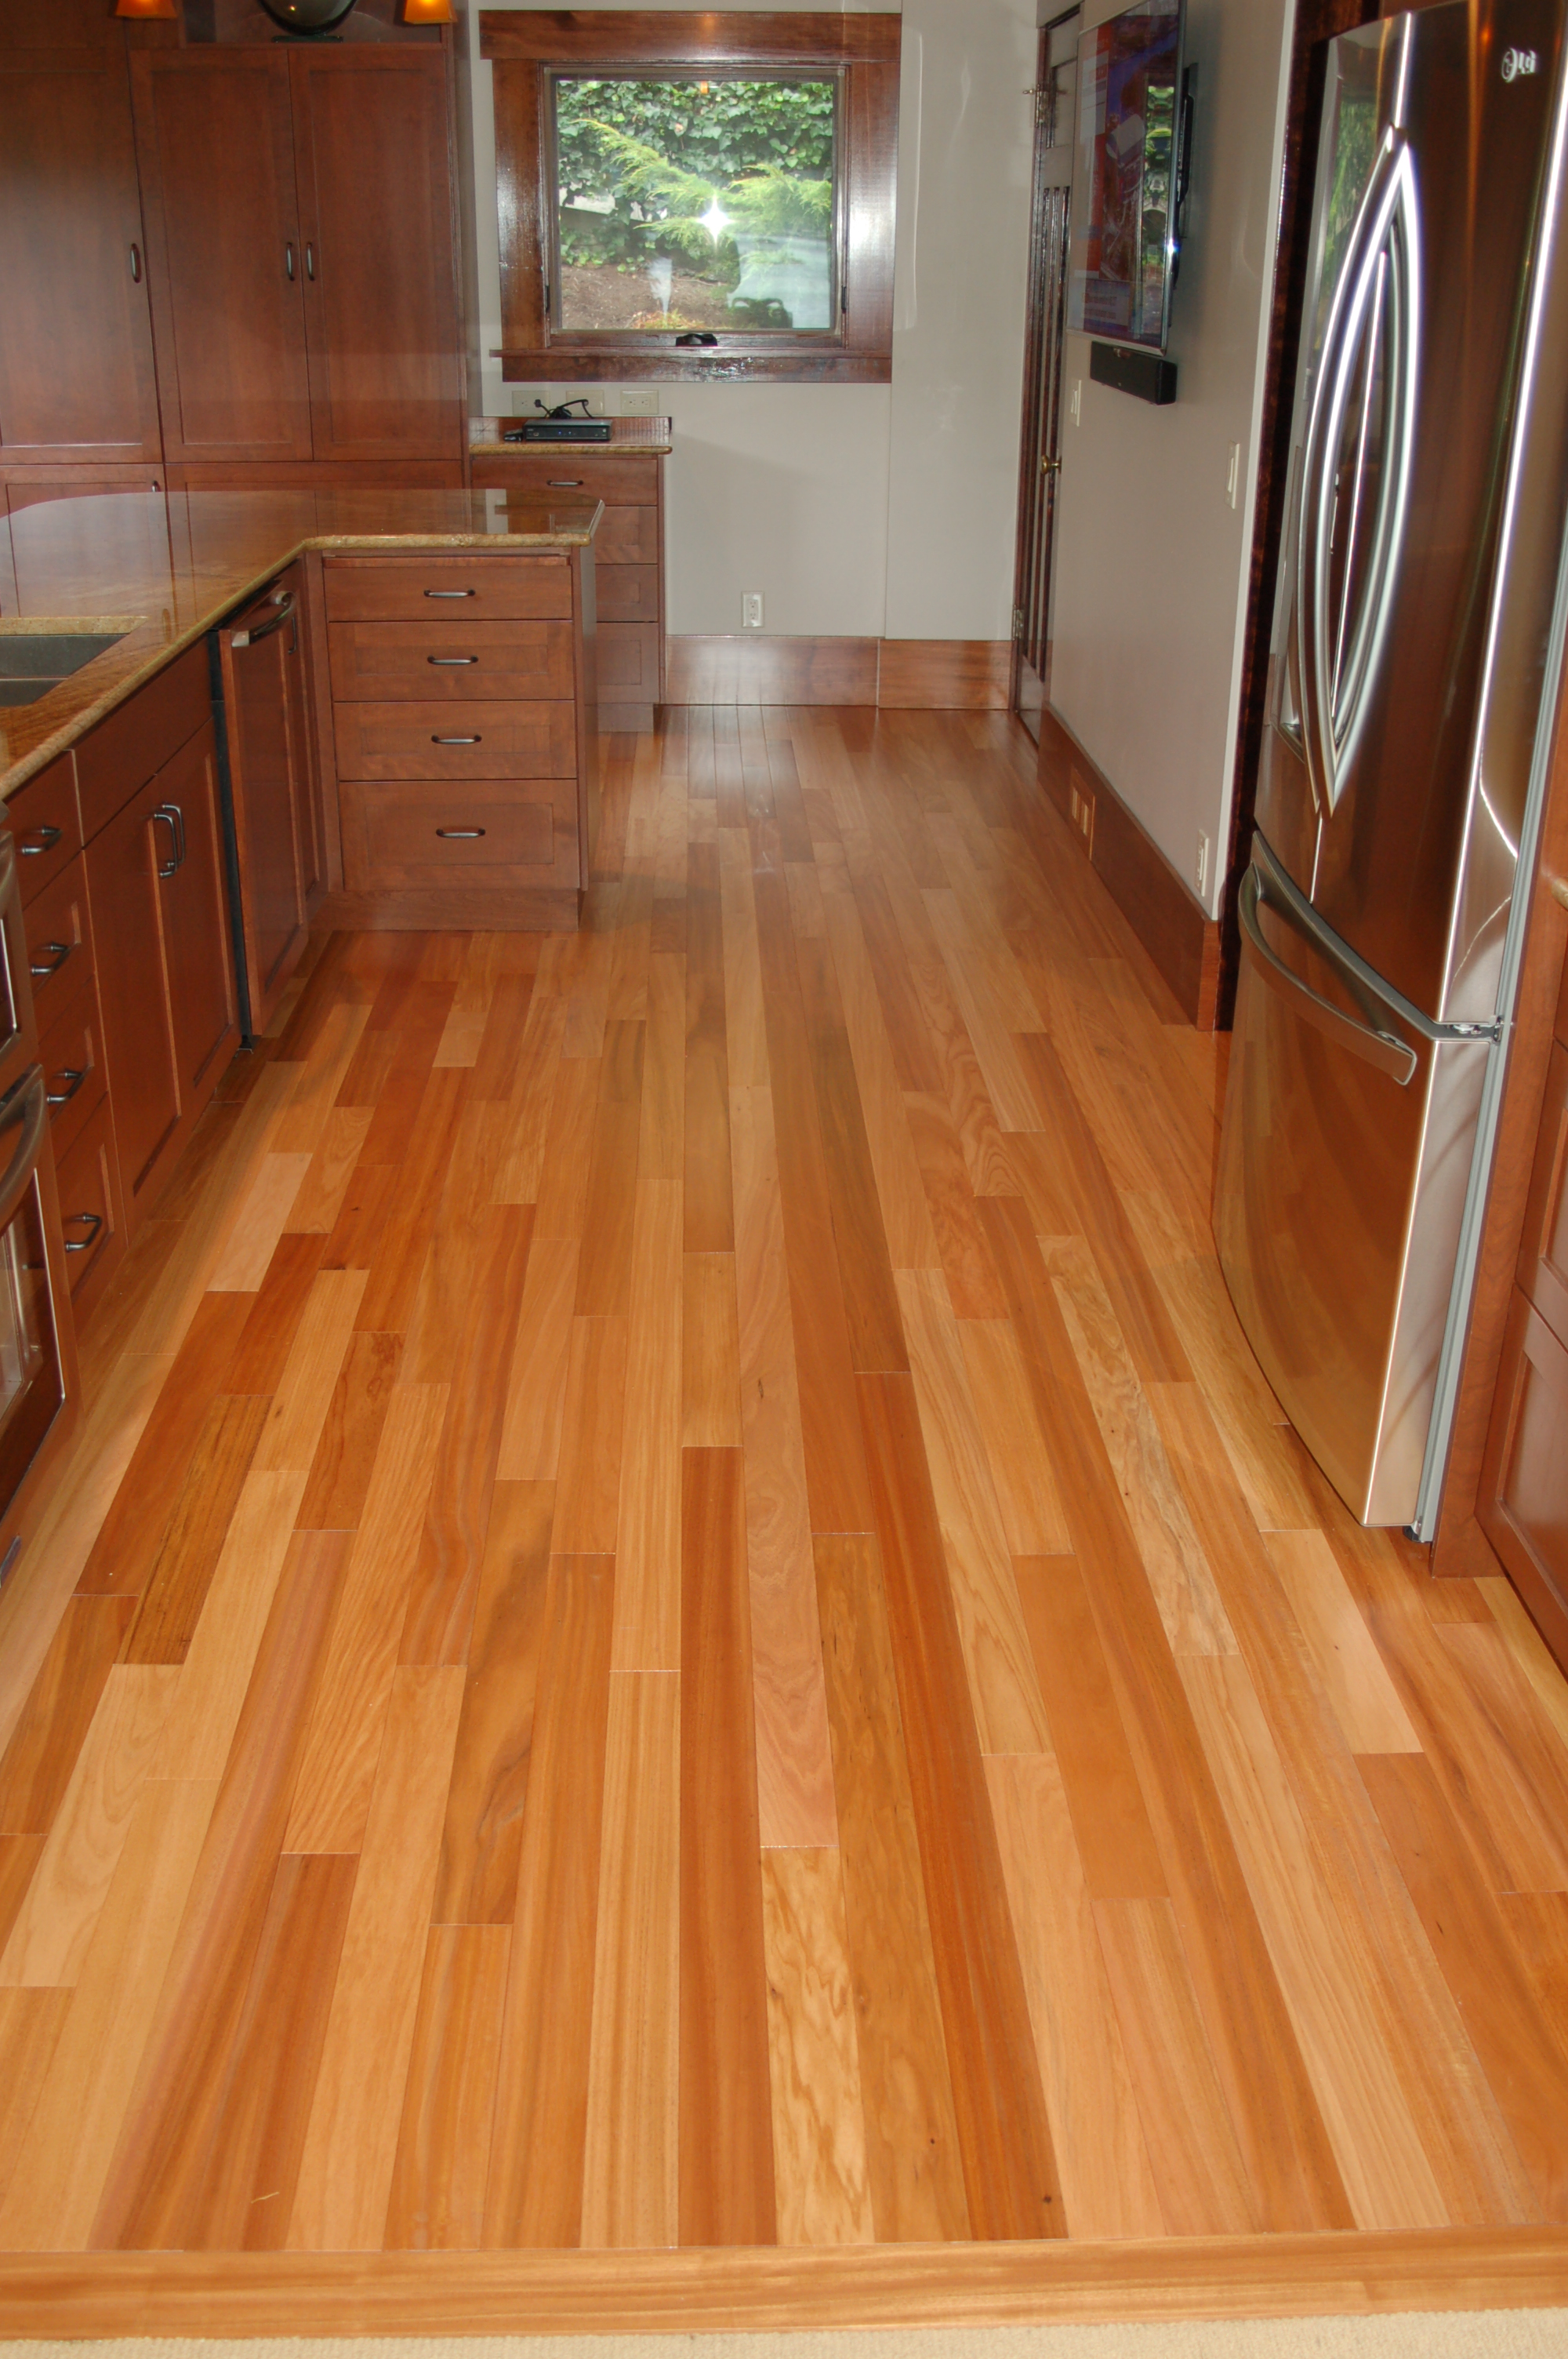 Pearwood flooring installed in kitchen remodel